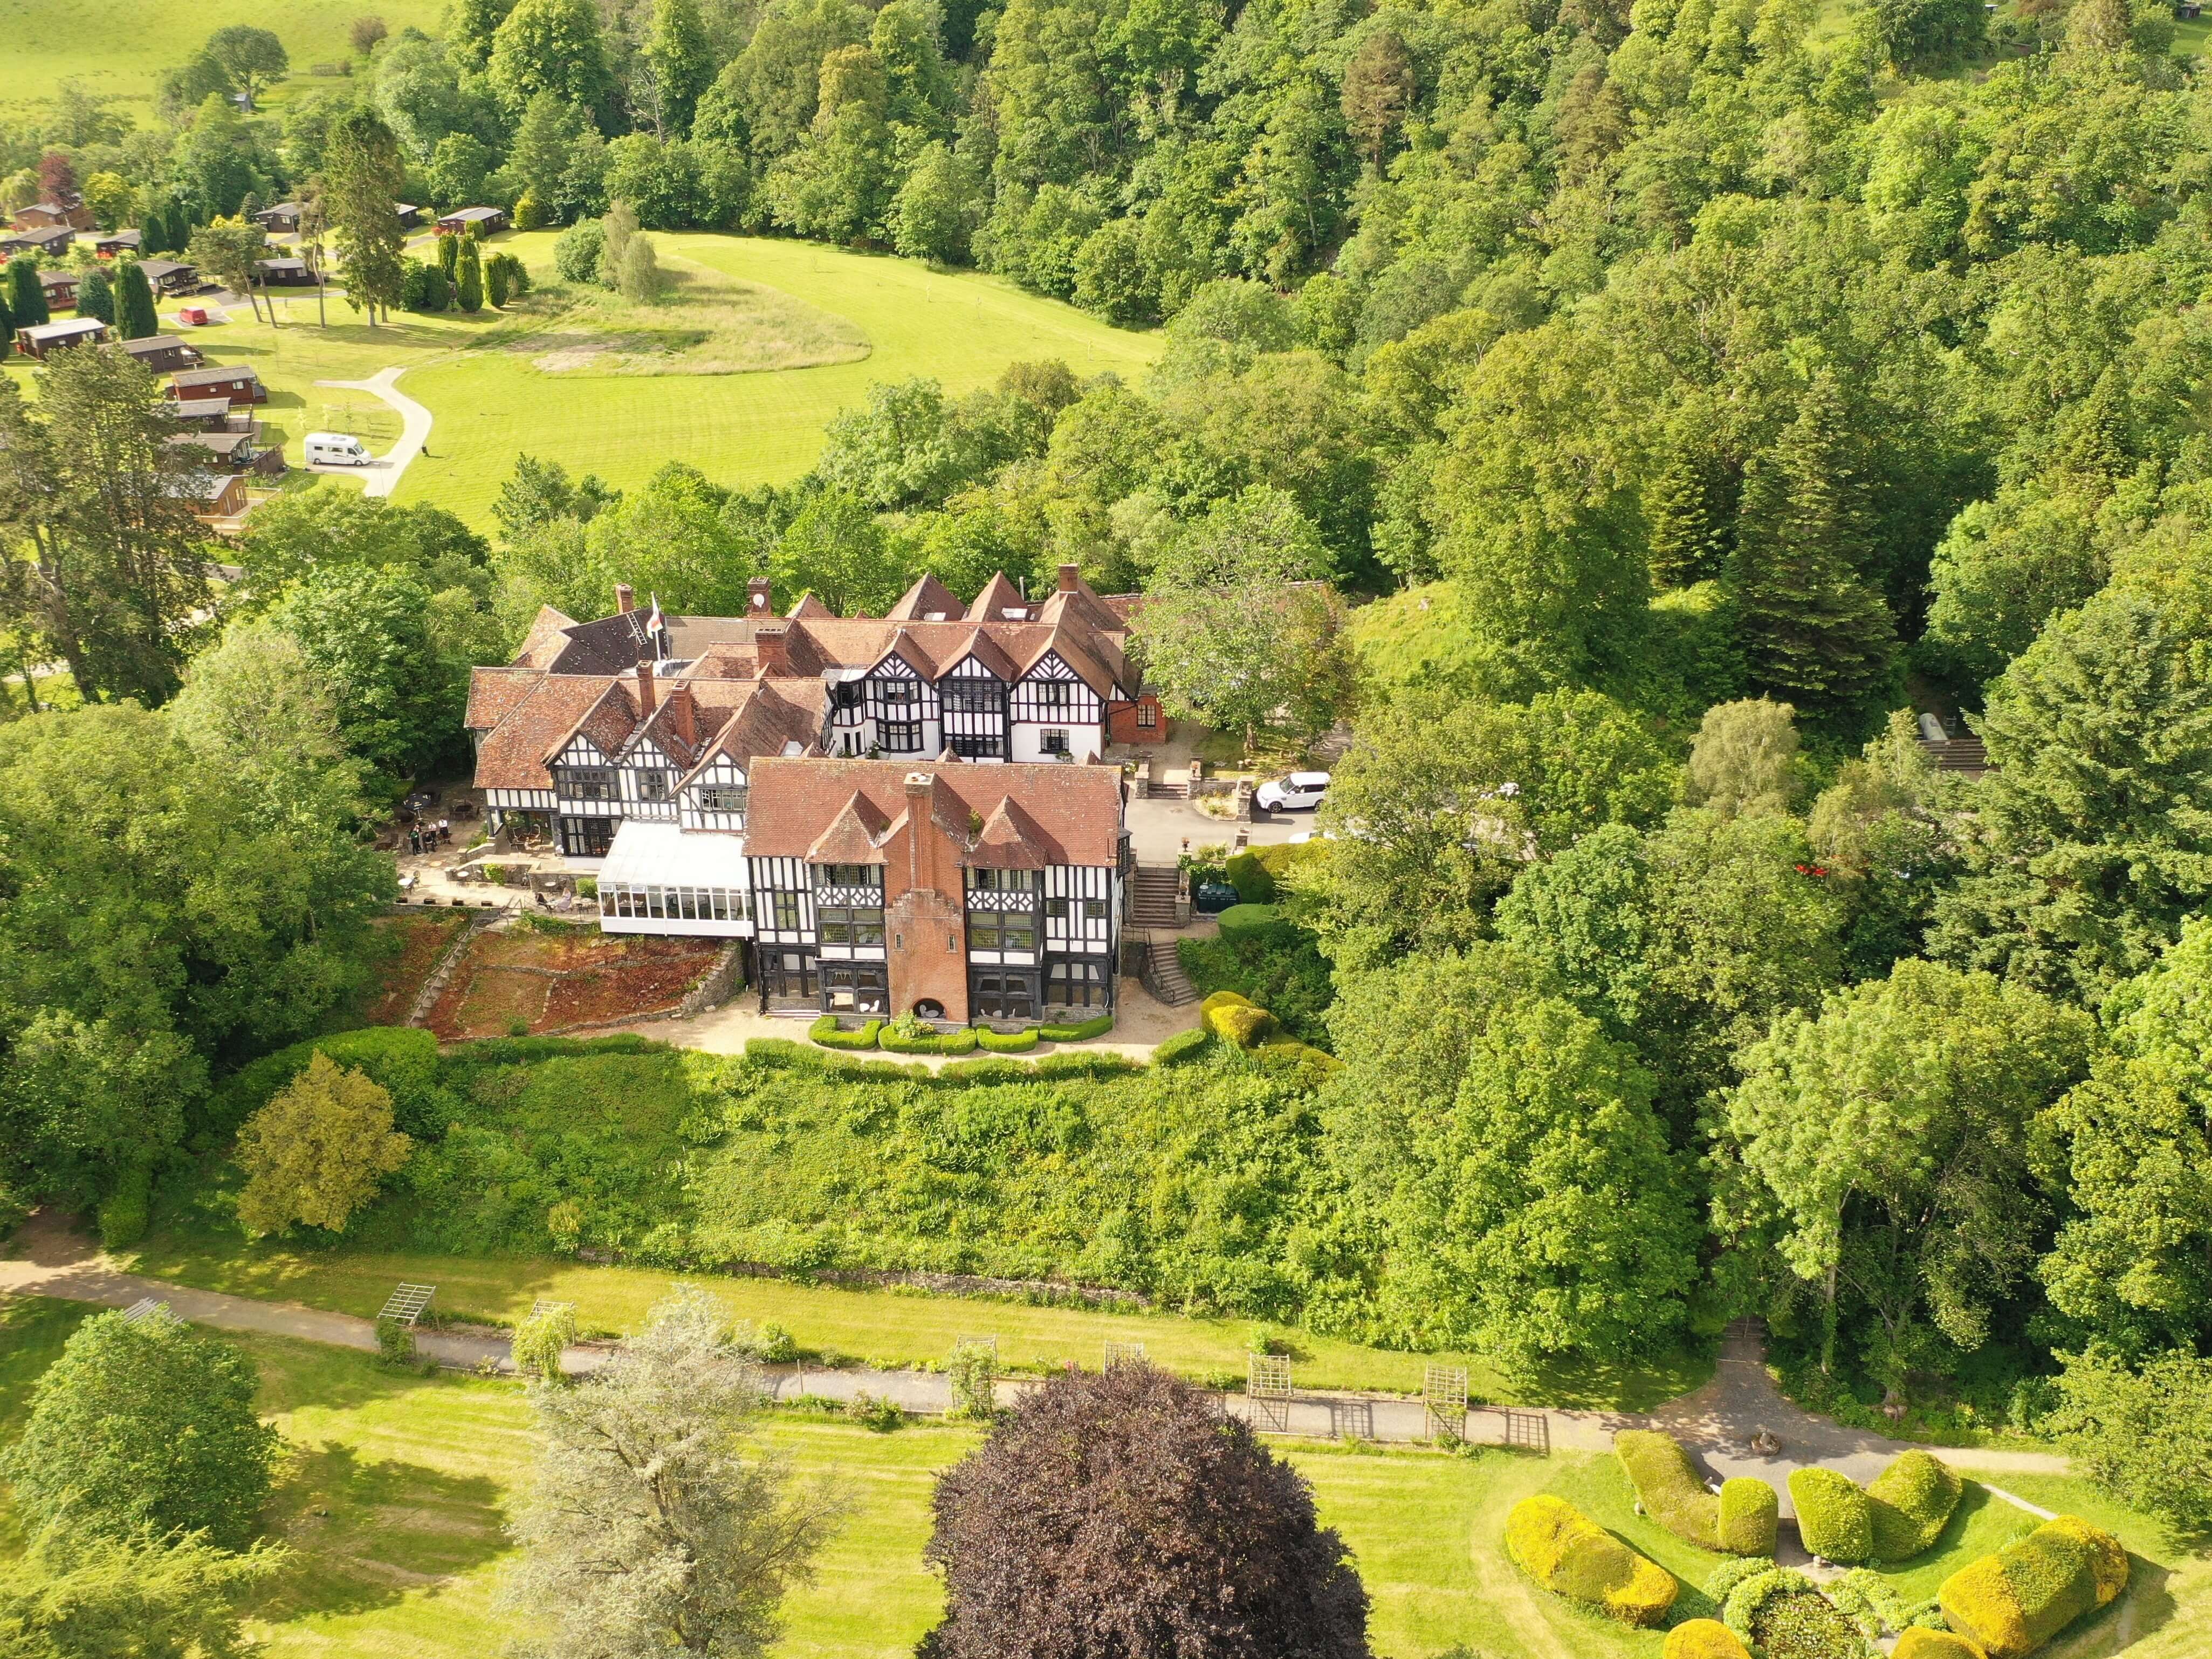 Caer Beris Manor - an aerial view of the house woth pretty grounds and gardens for weddings